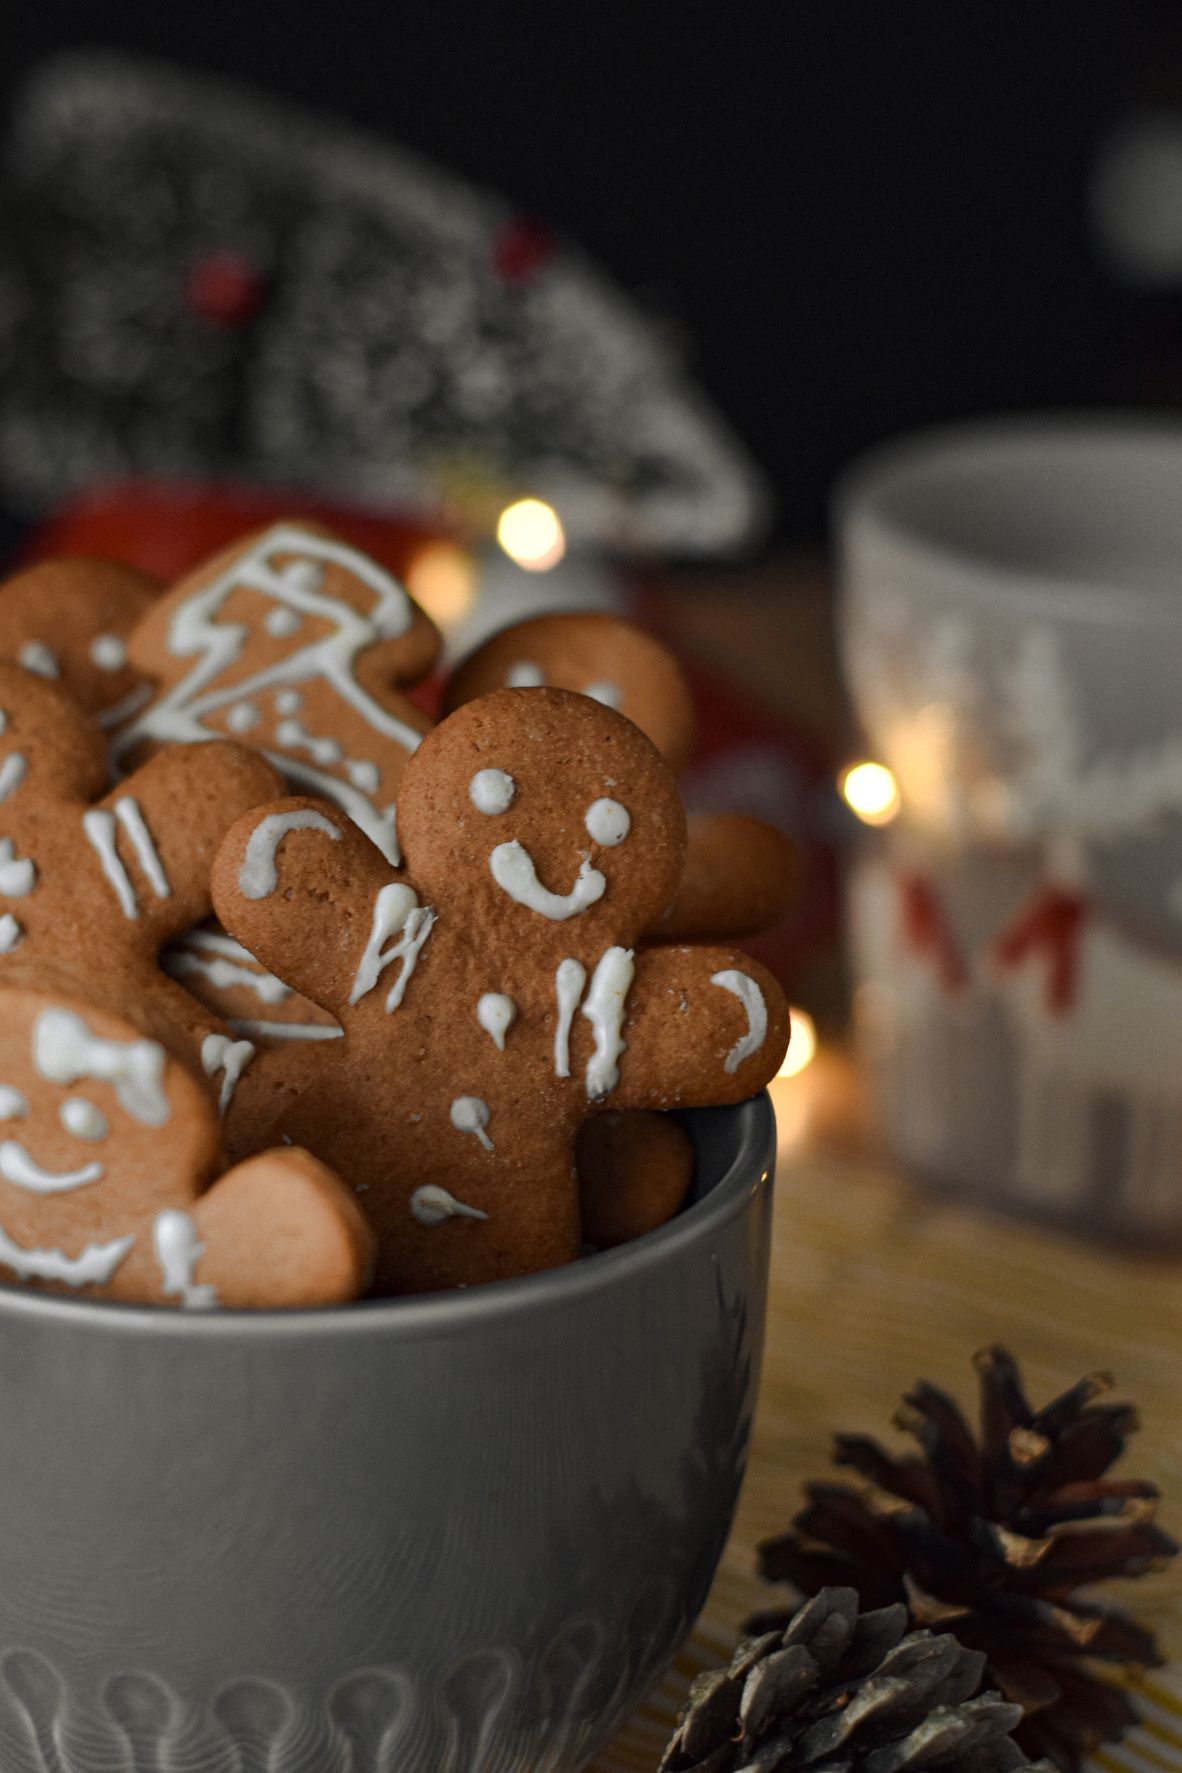 Get Chloe Holiday's gingerbread recipe at the Winter Blogfest at Long and Short Reviews, and a chance to win an audio review copy of A Boy and his Dog!